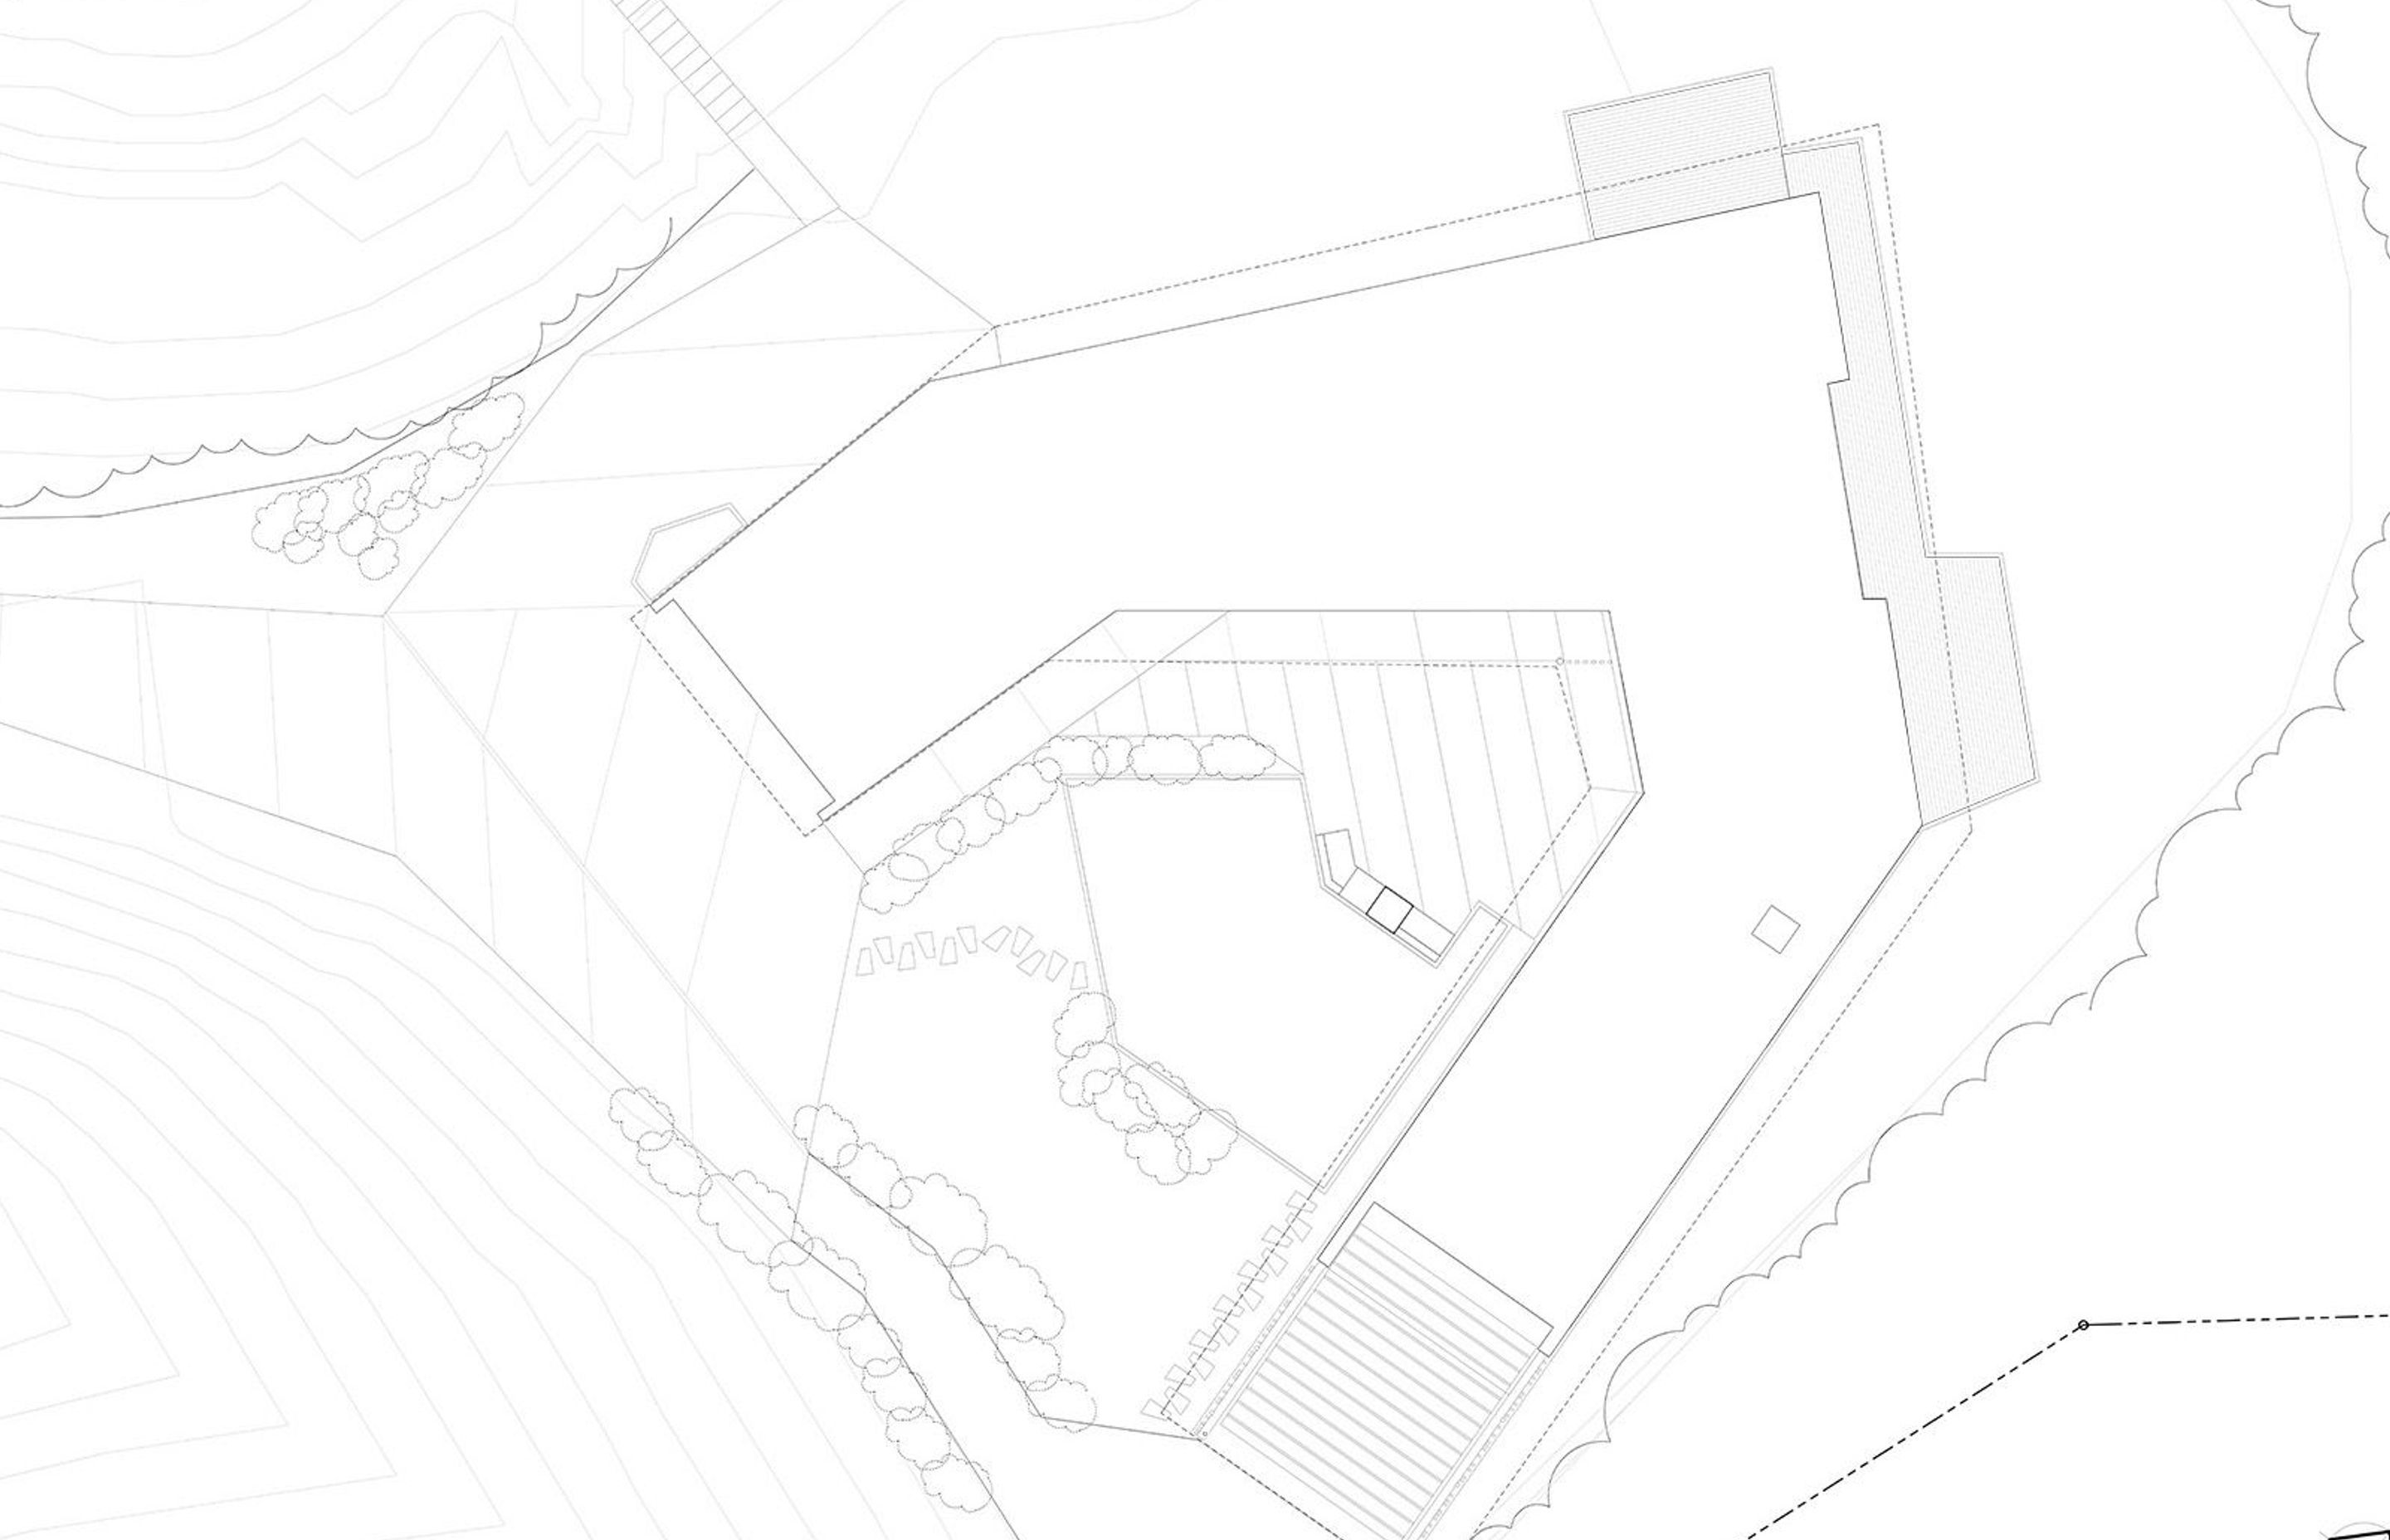 The site plan for Ostrich House by Parsonson Architects.